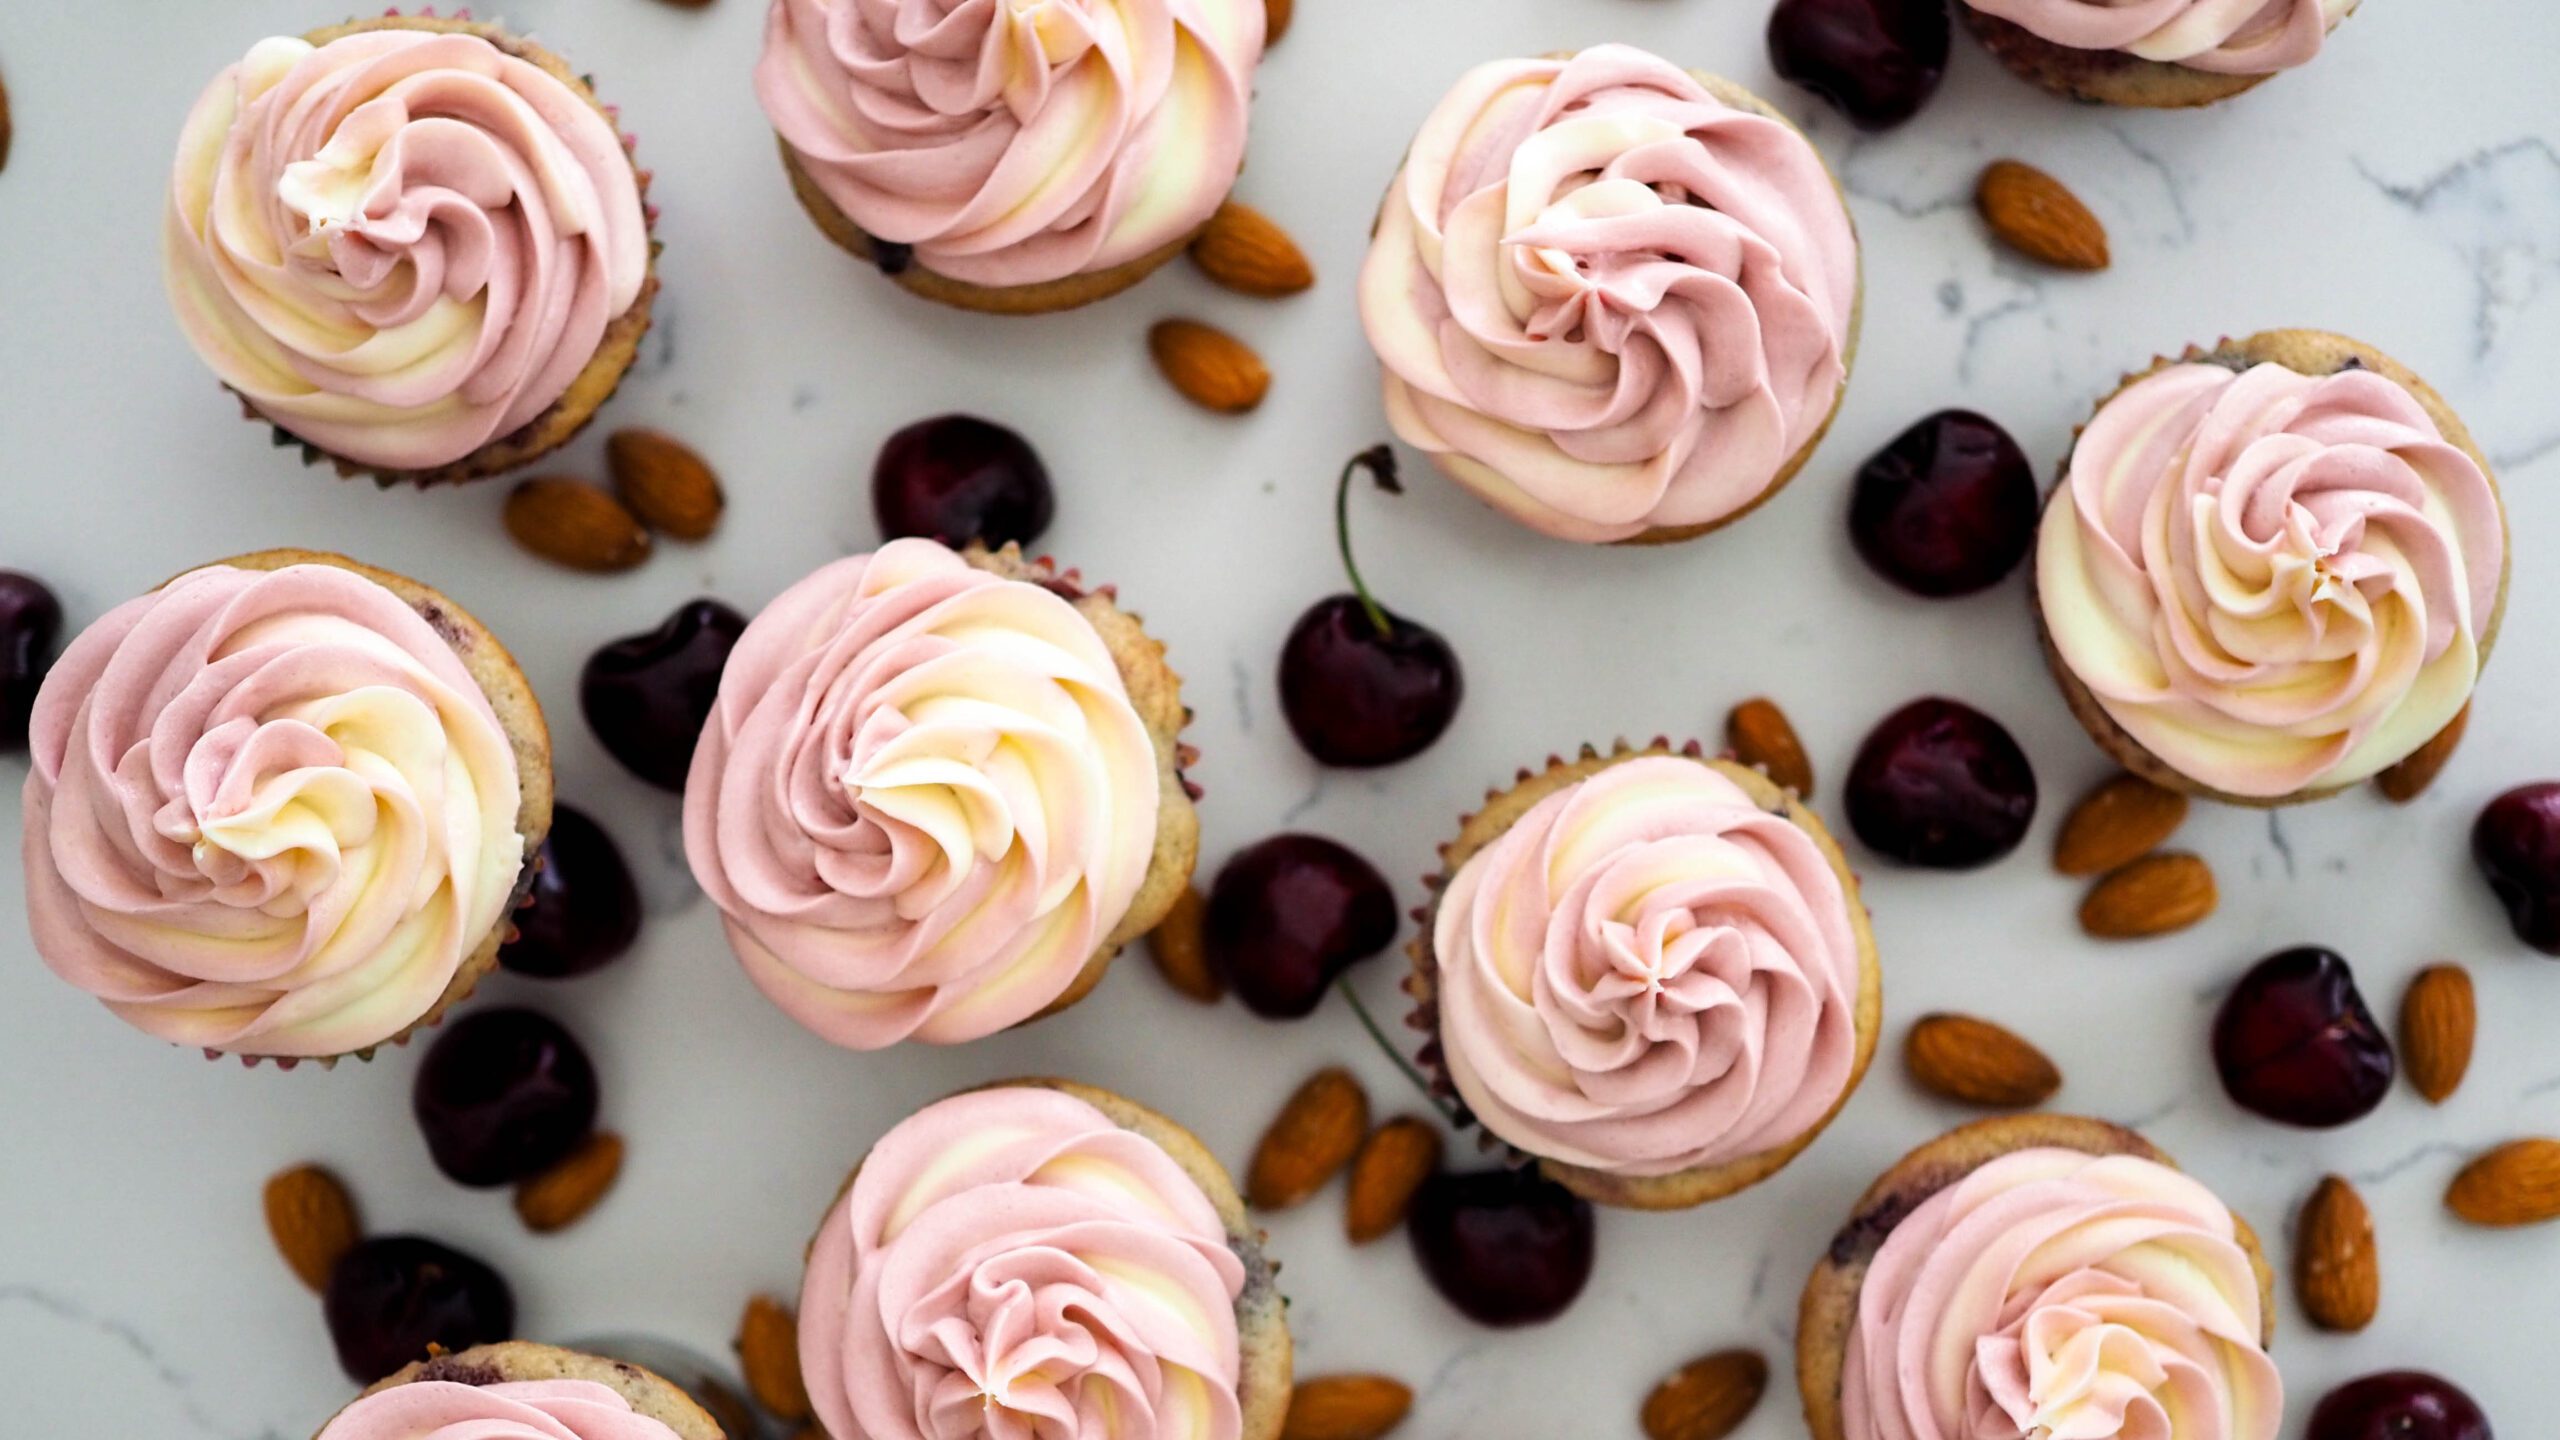 Cherry almond cupcakes amid cherries and almonds.